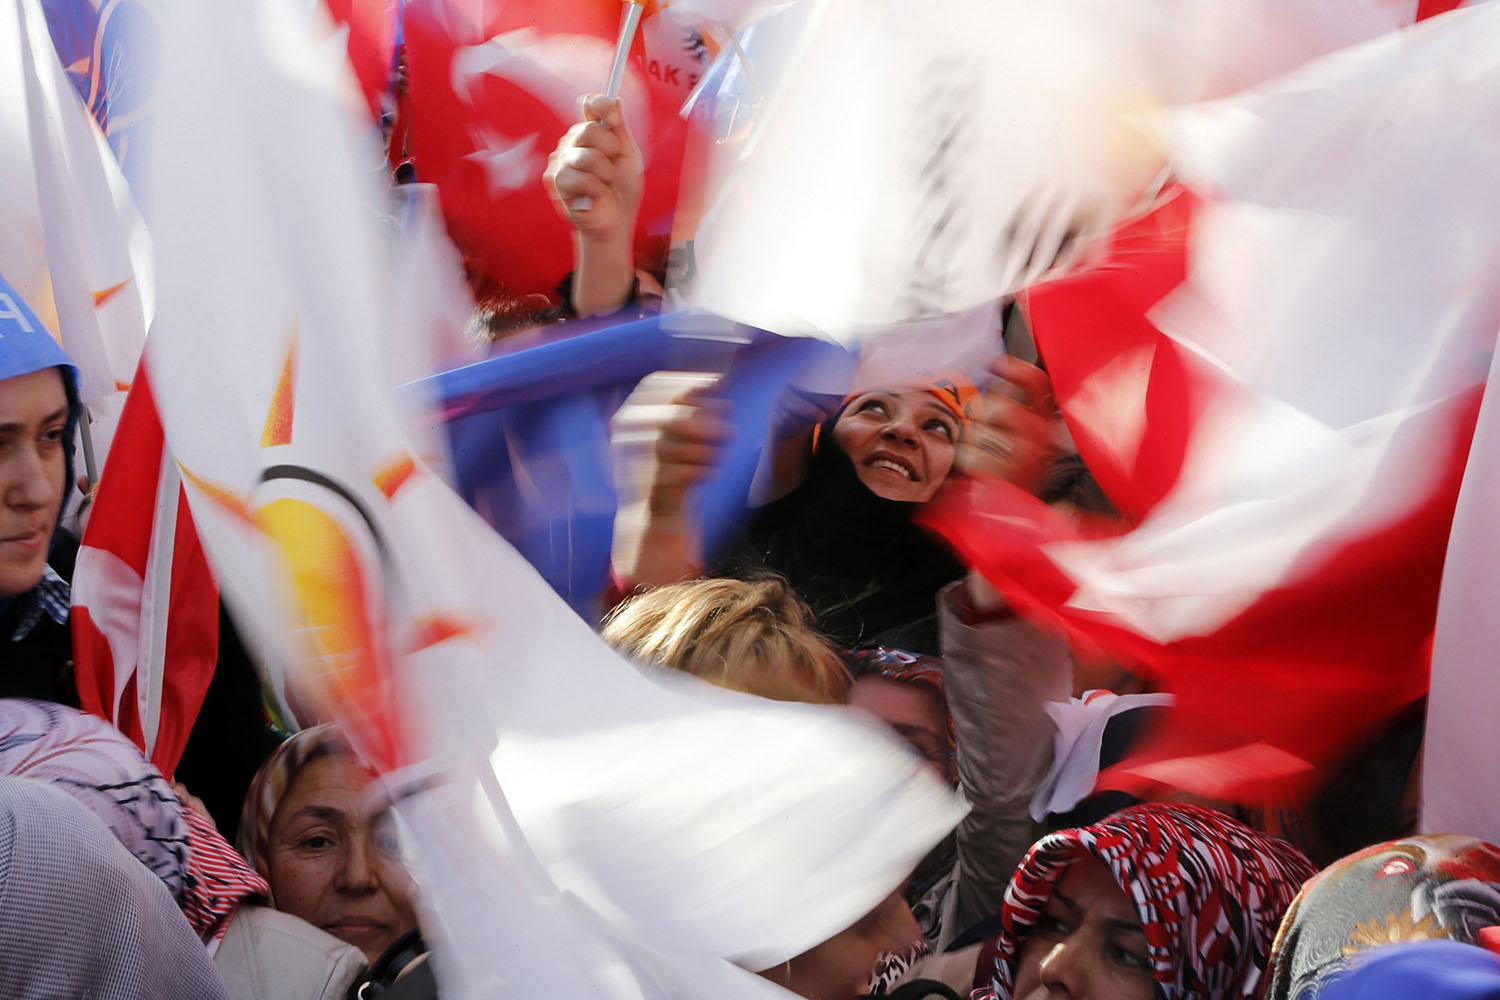 Mar. 4, 2014. Supporters of ruling AK Party wave party flags during an election rally in Kirikkale, central Turkey.